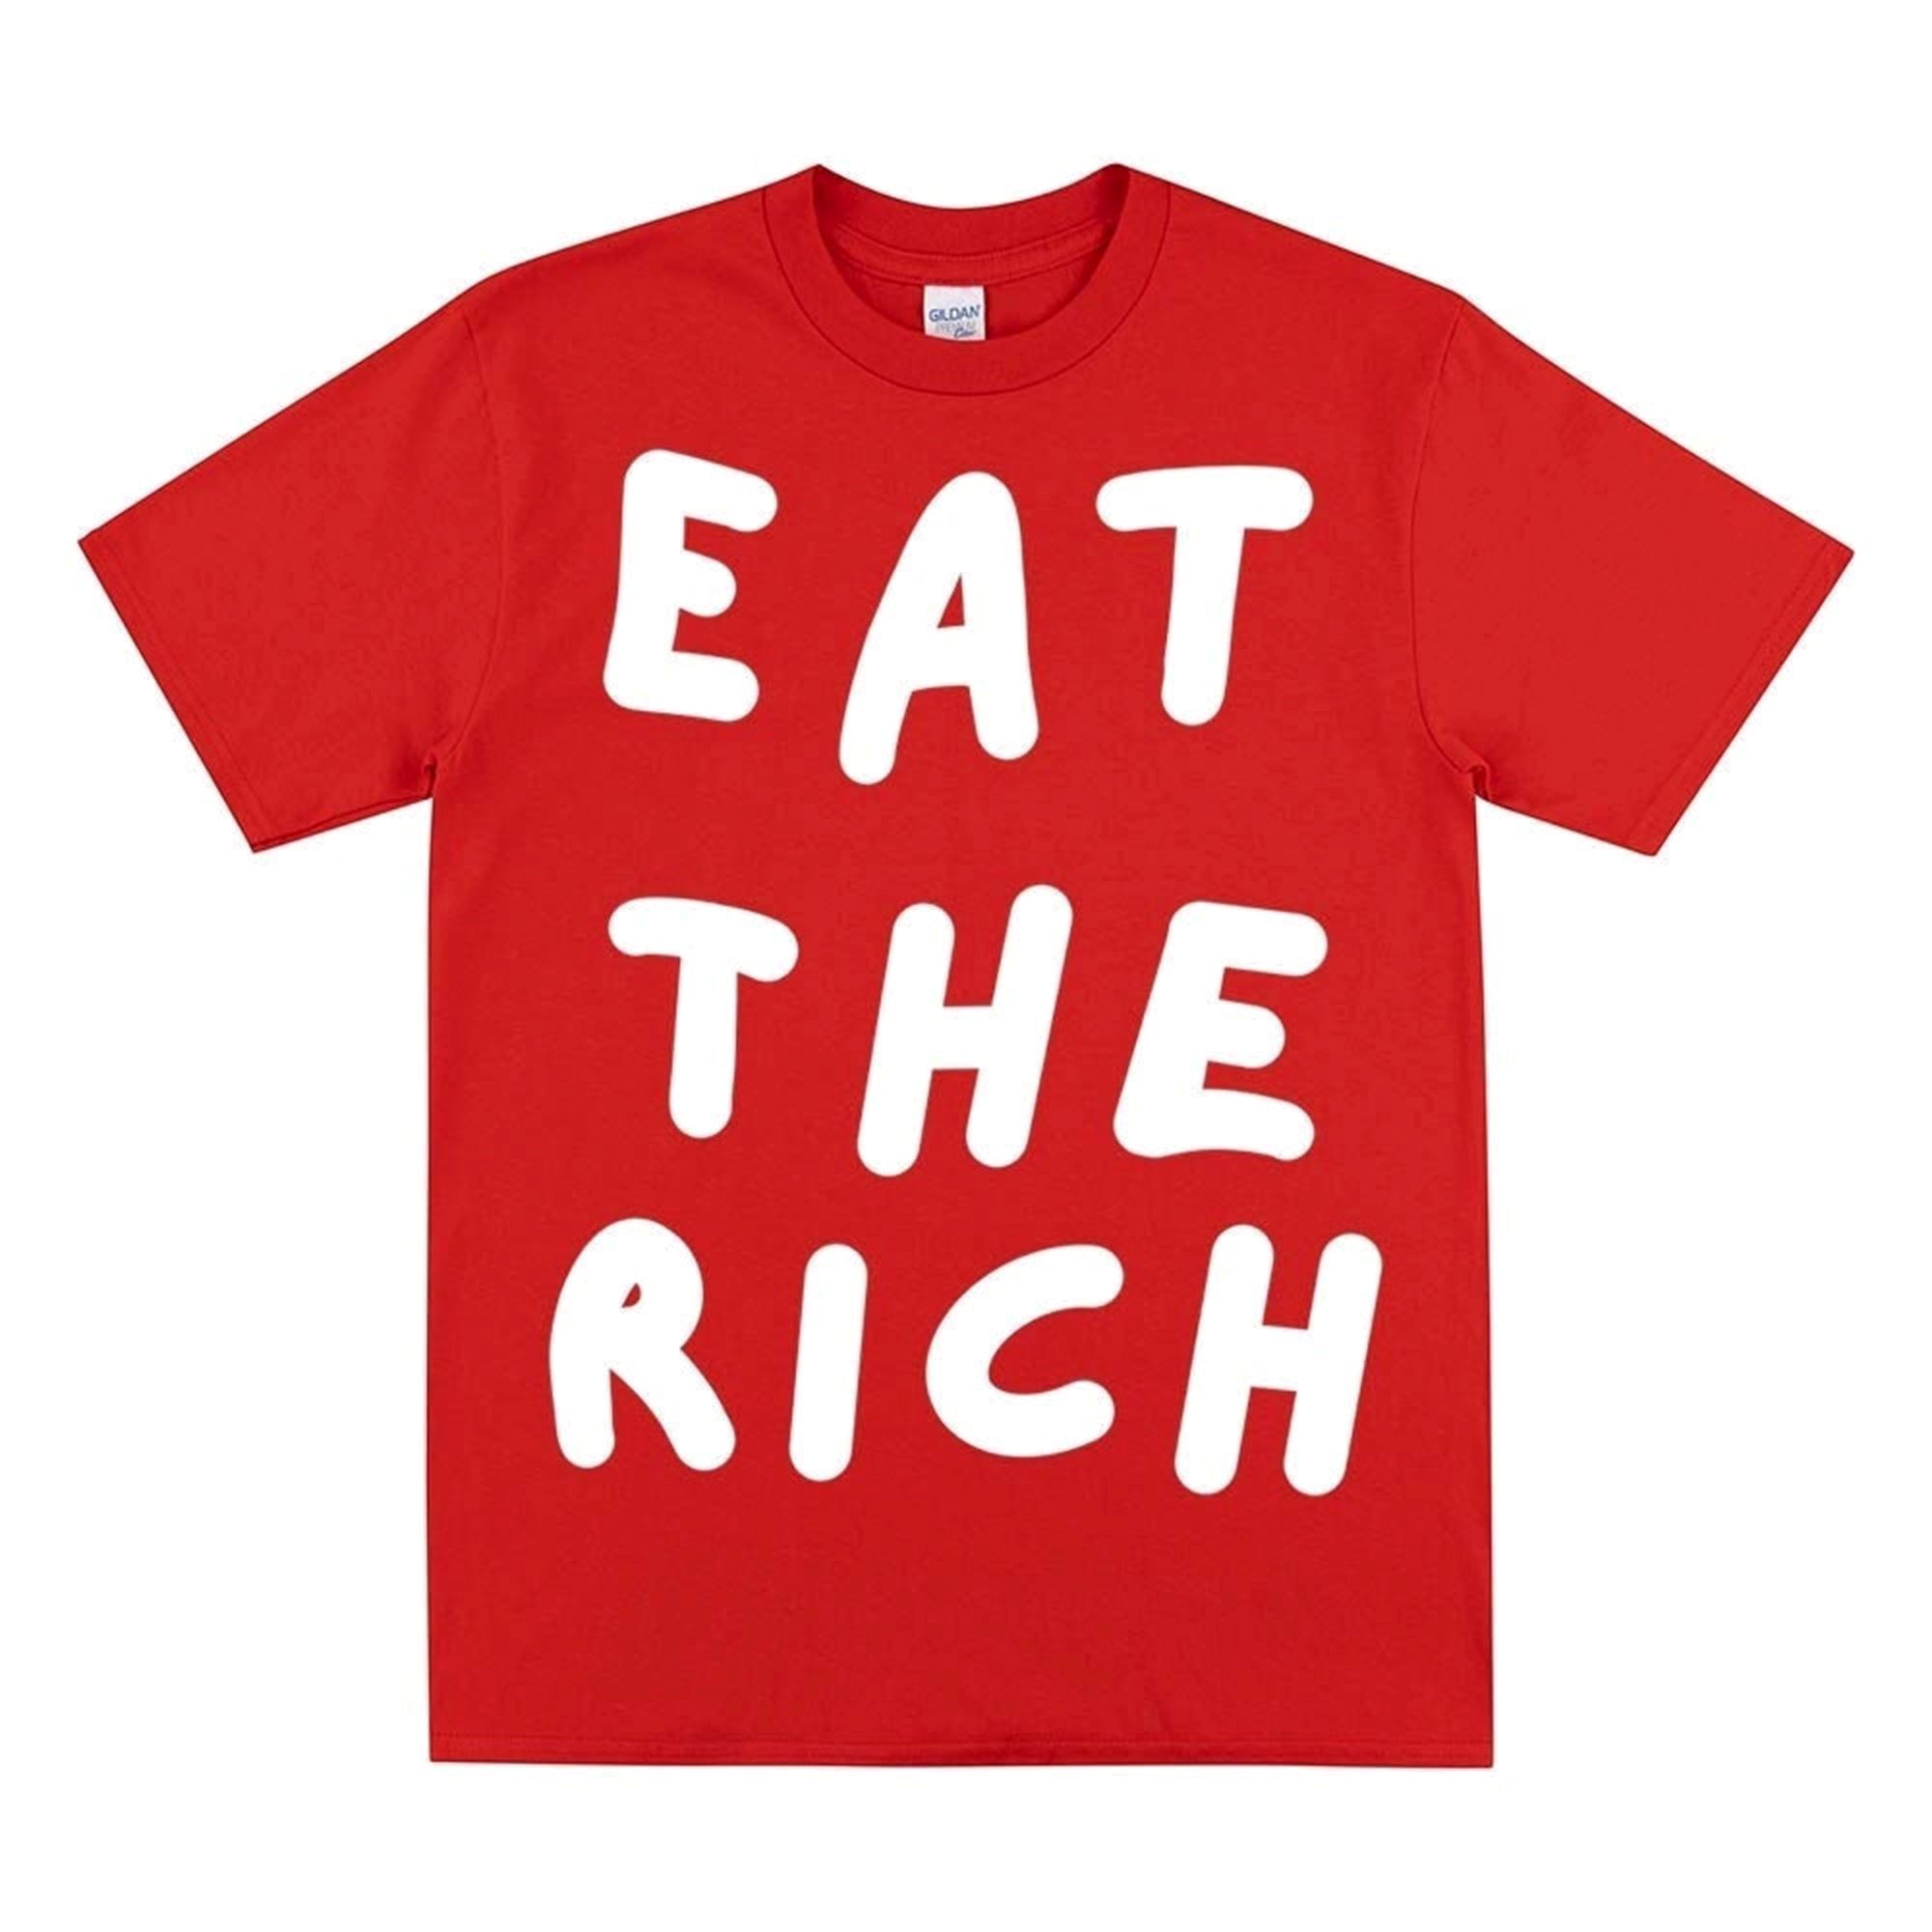 Attractive Eat The Rich T-shirt Present For Socialists Anarchist Political Slogan The Revolution Will Not Be Televised Pro Working Classes 